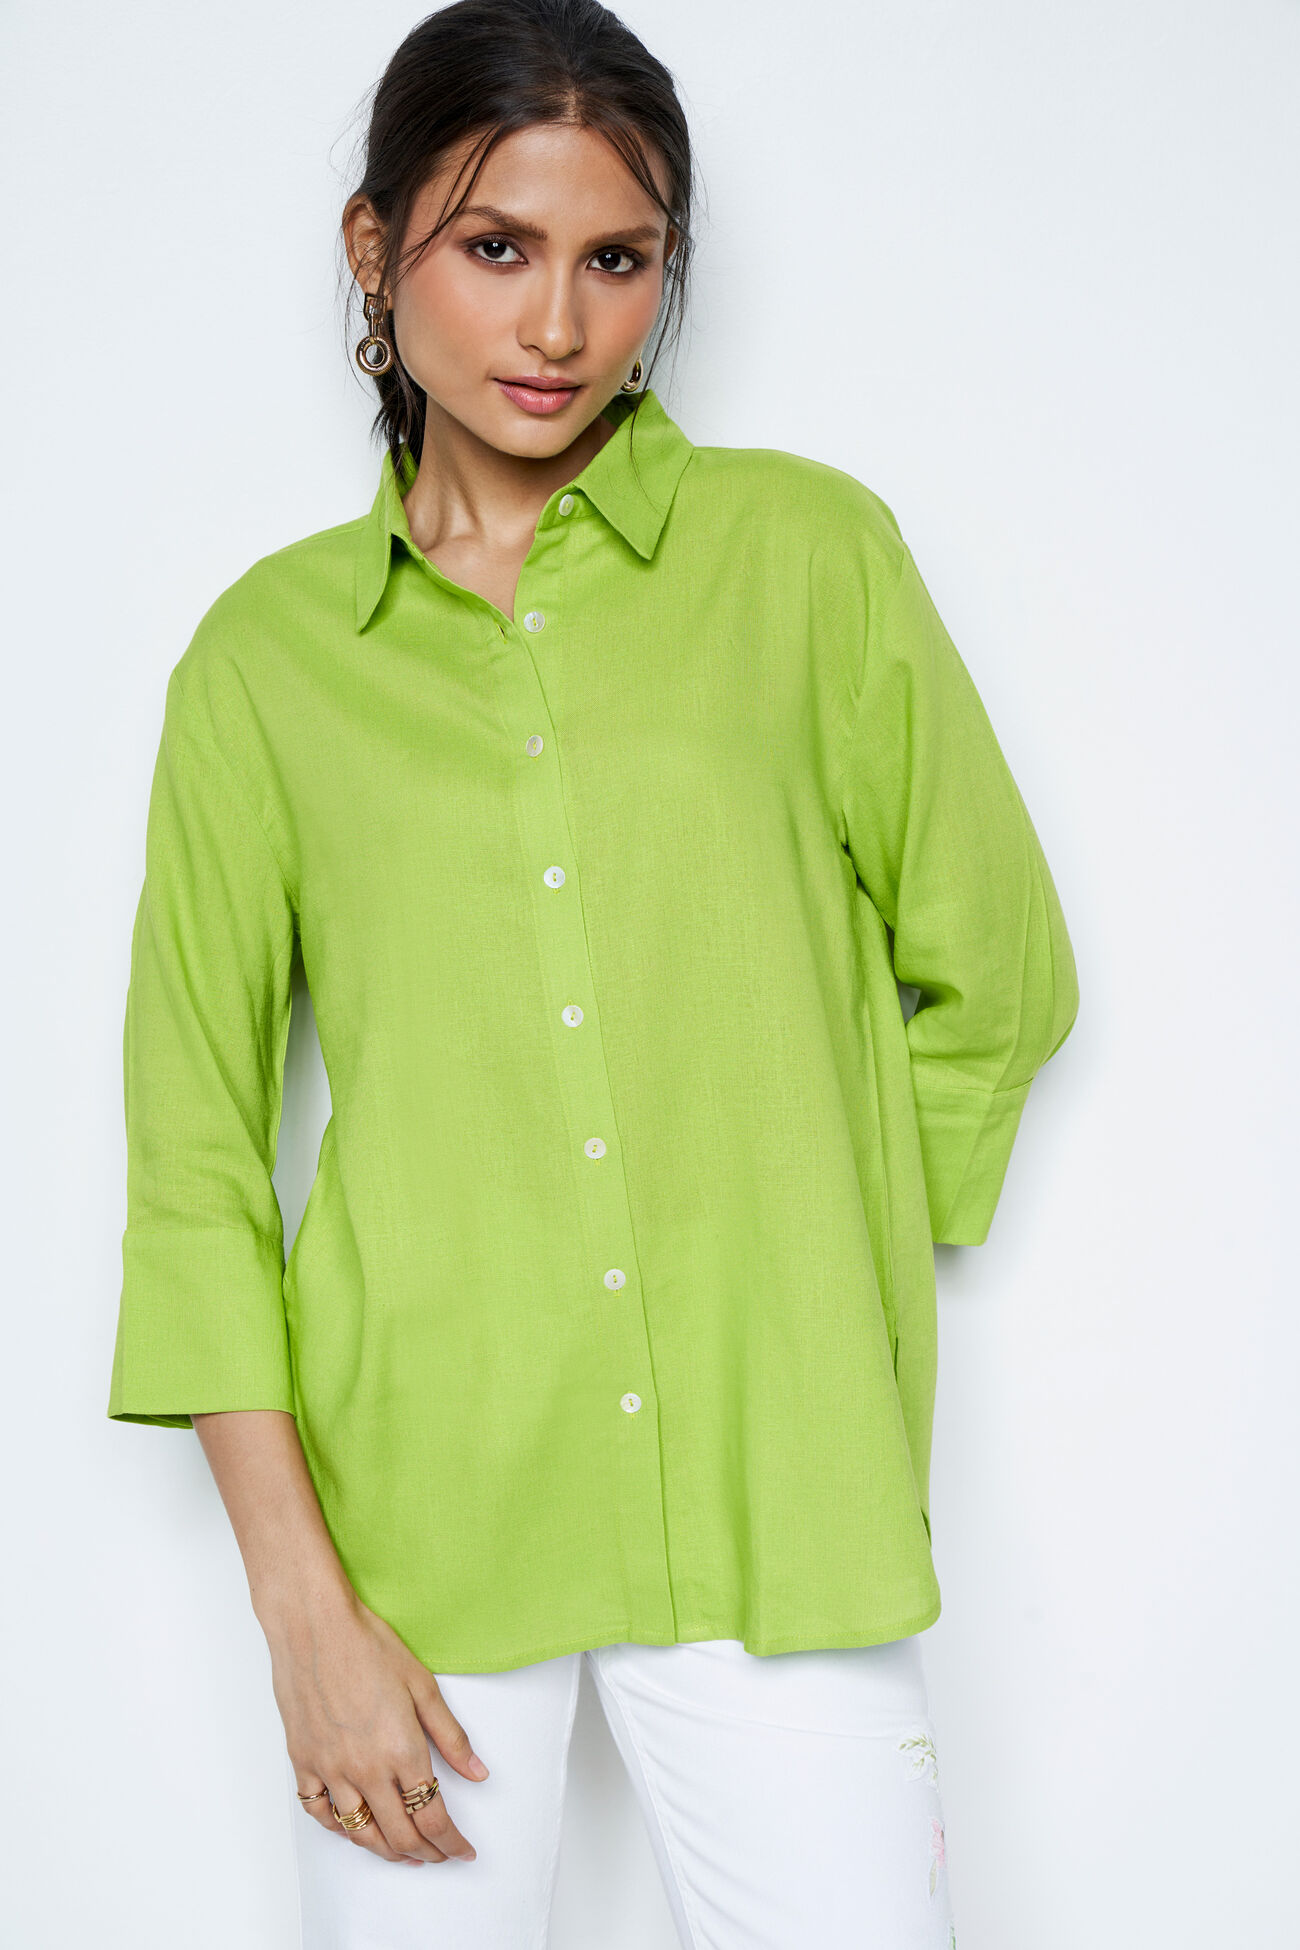 Sublime Loose Fit Top, Green, image 1